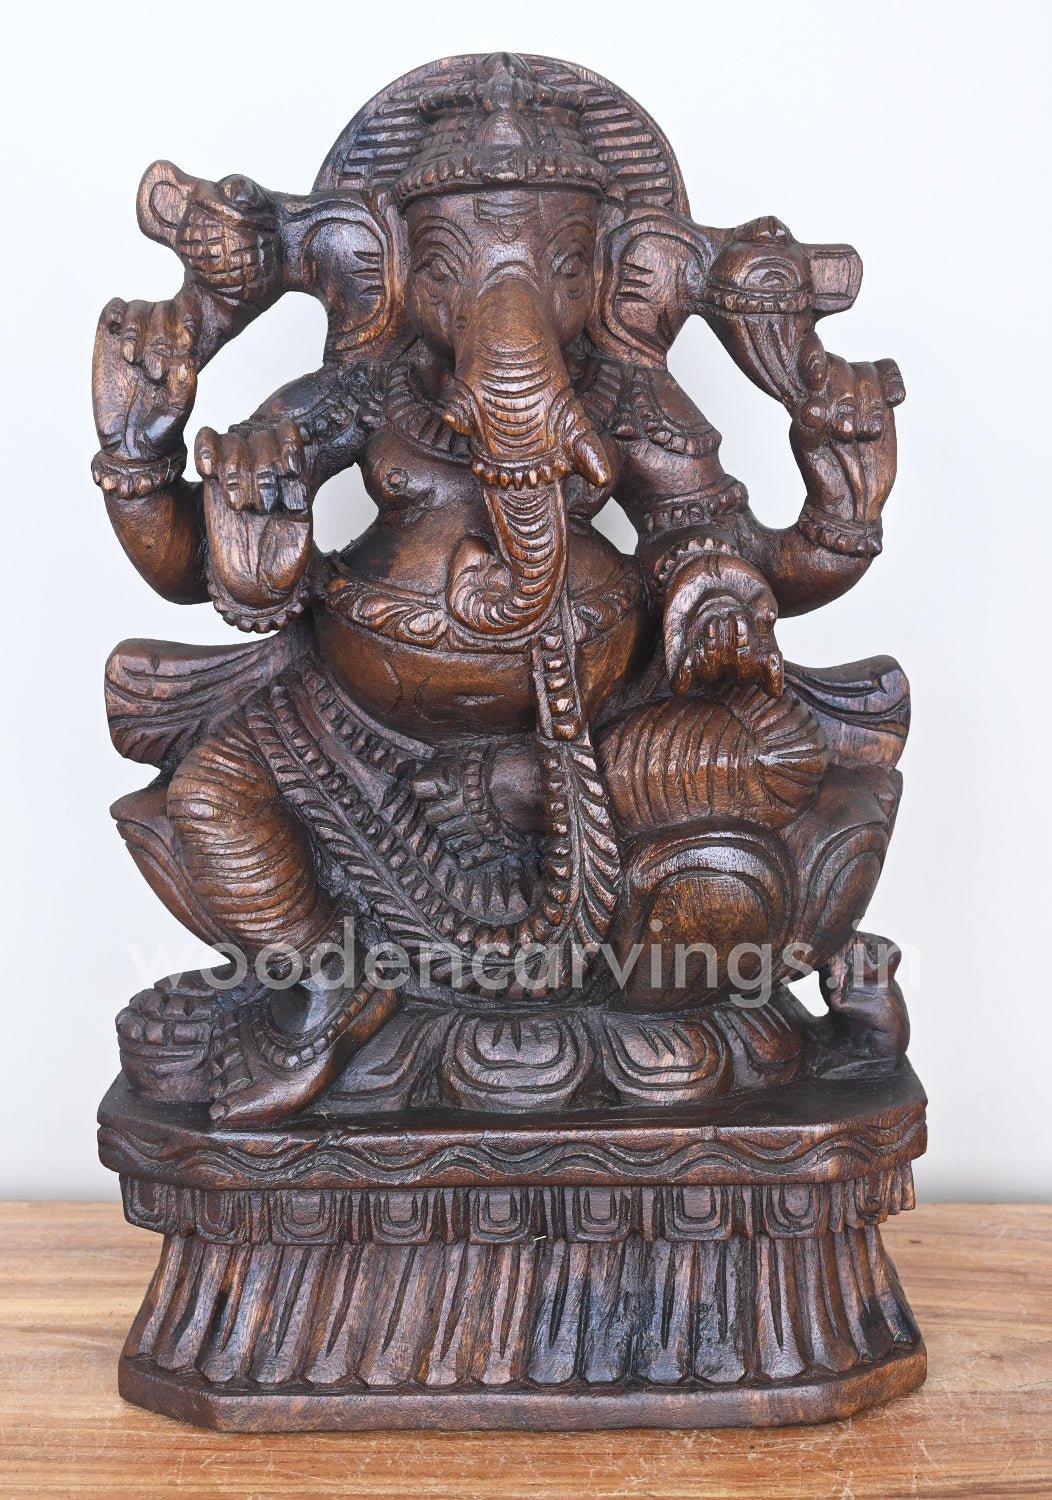 Lotus Ganapathi Holding Ladoo in His Hand Showpiece Wooden Sculpture 18"